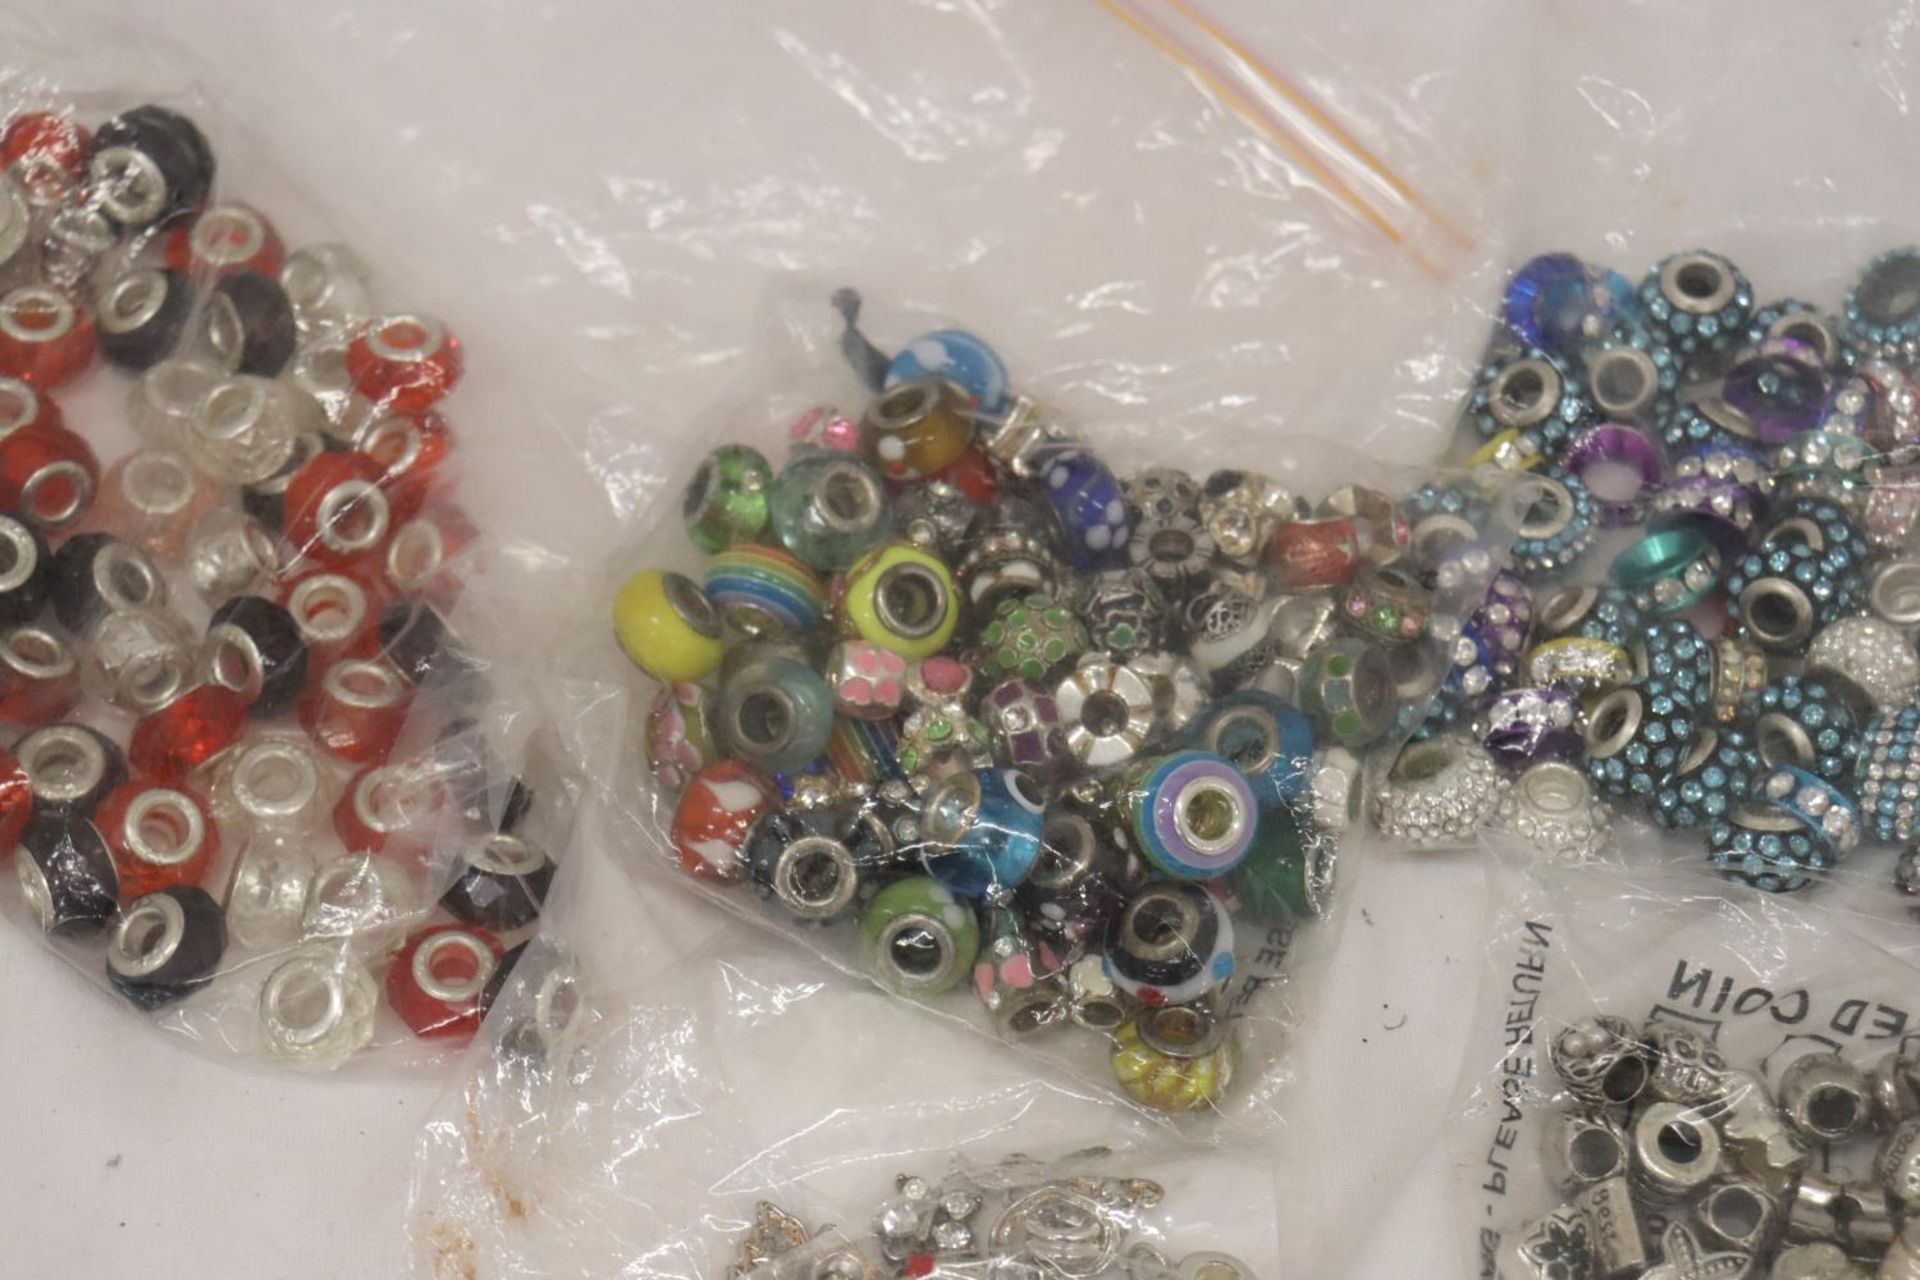 A LARGE QUANTITY OF PANDORA STYLE BEADS, SOME MARKED 925 - Image 3 of 8